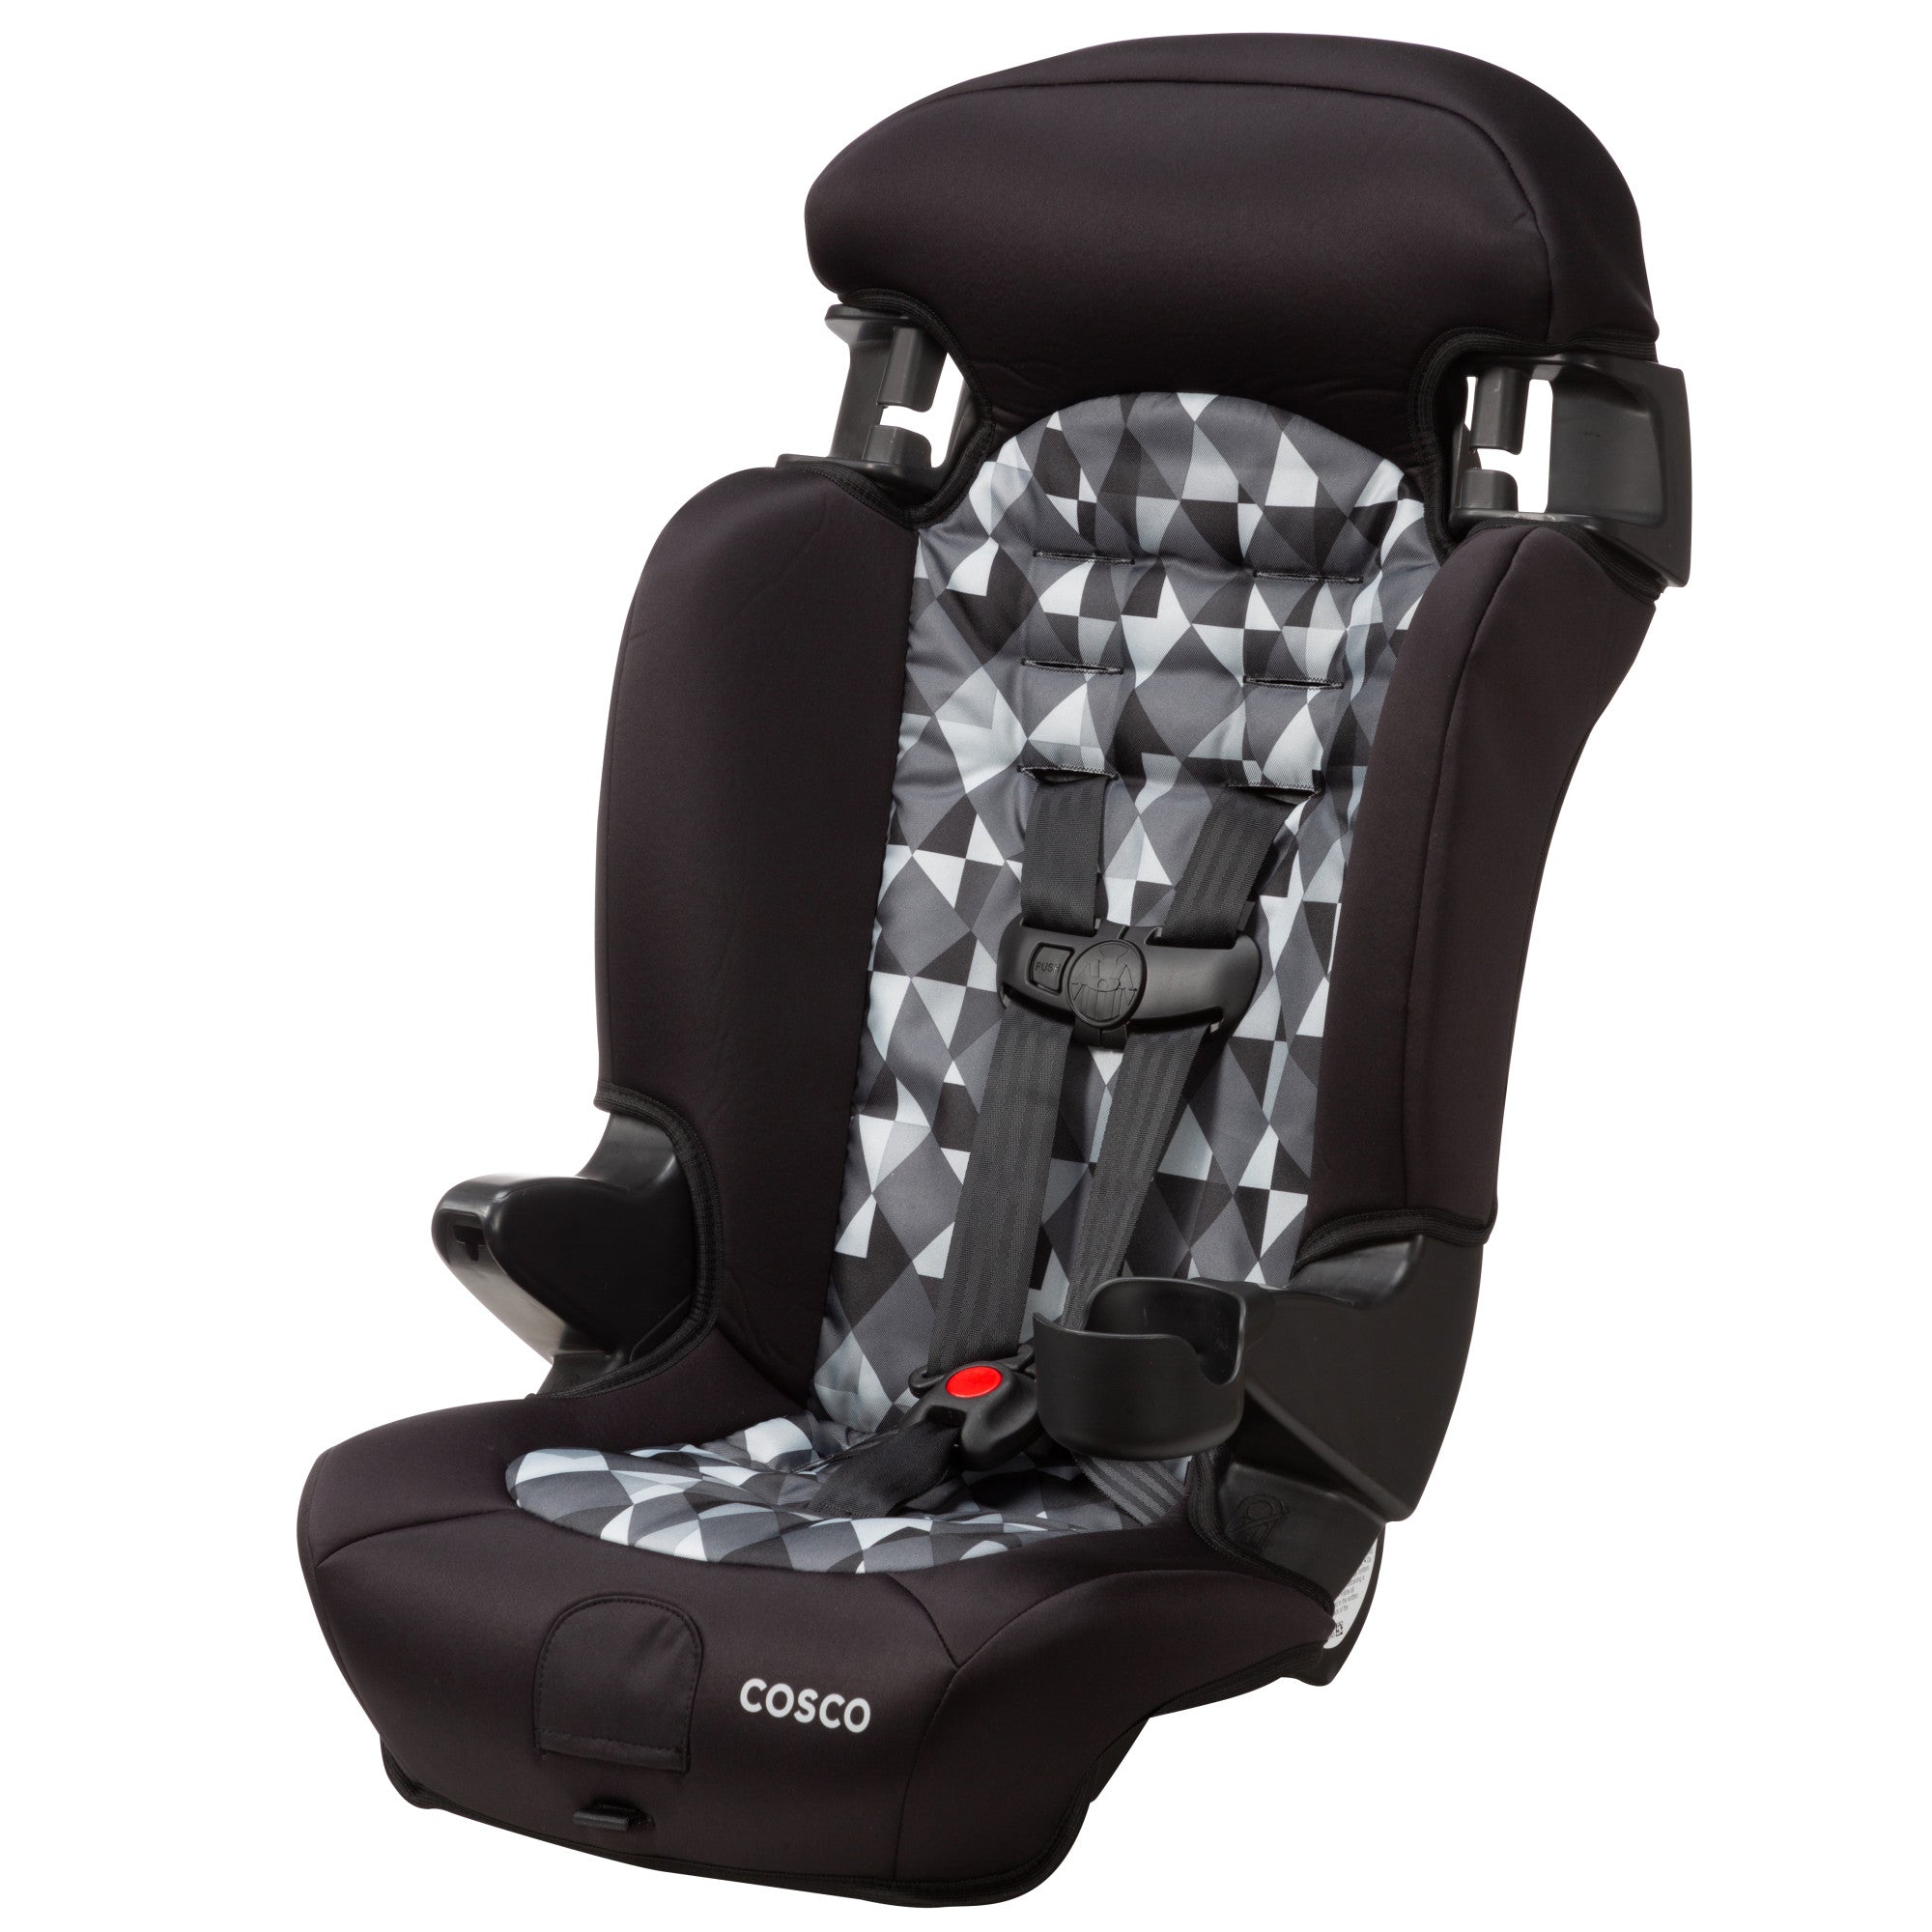 Finale 2-in-1 Booster Car Seat - Storm Kite